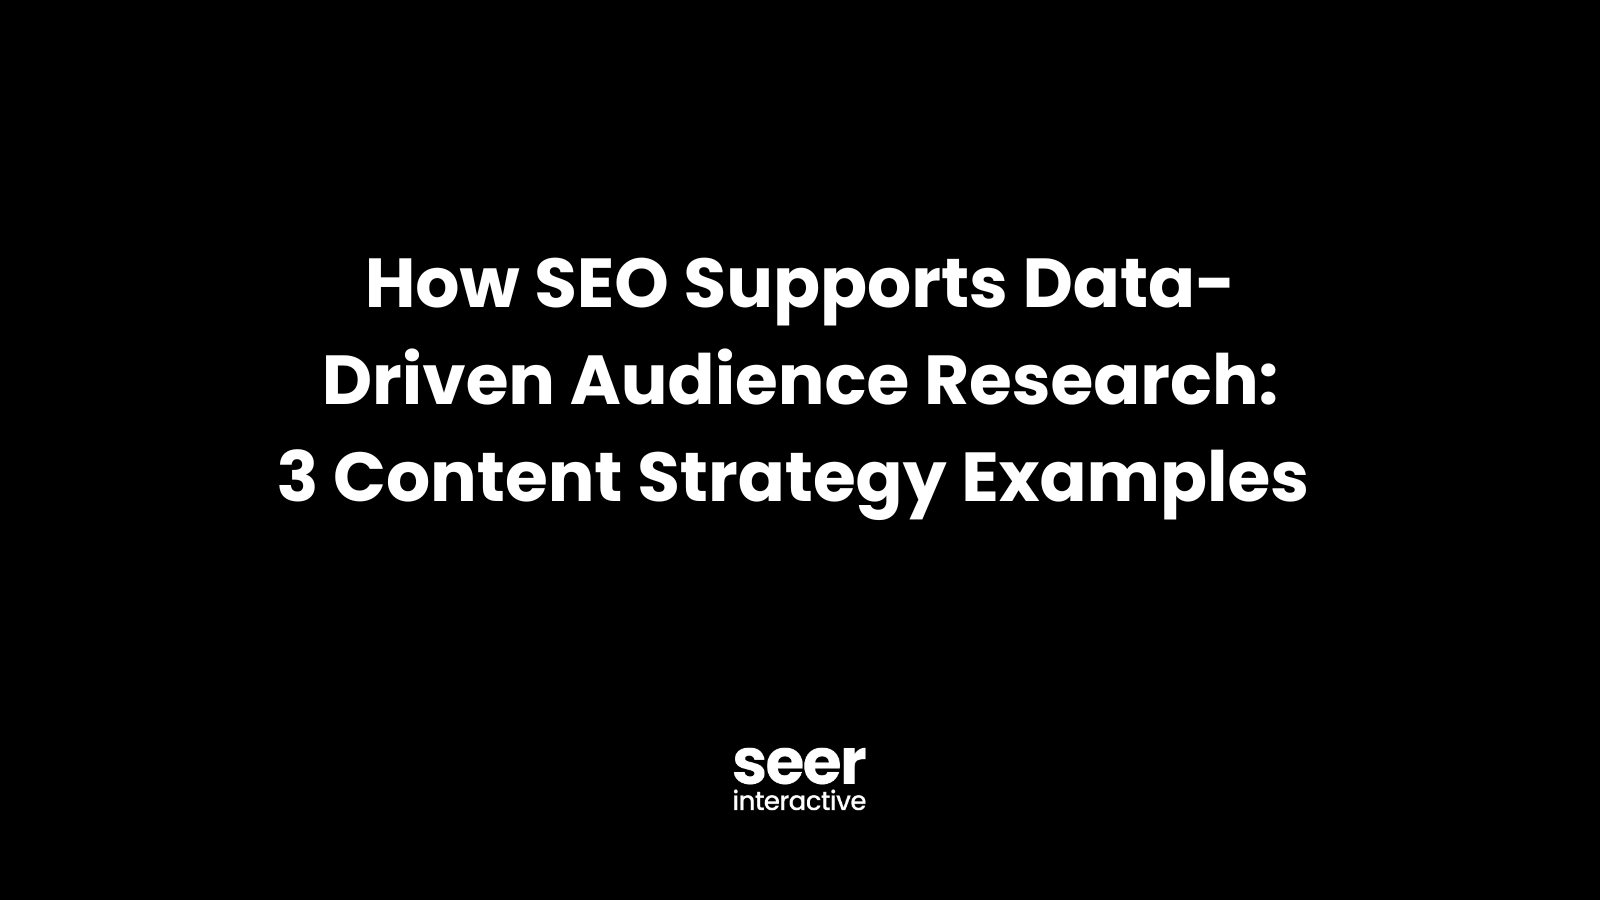 3 Content Strategy Examples Driven by SEO Audience Research